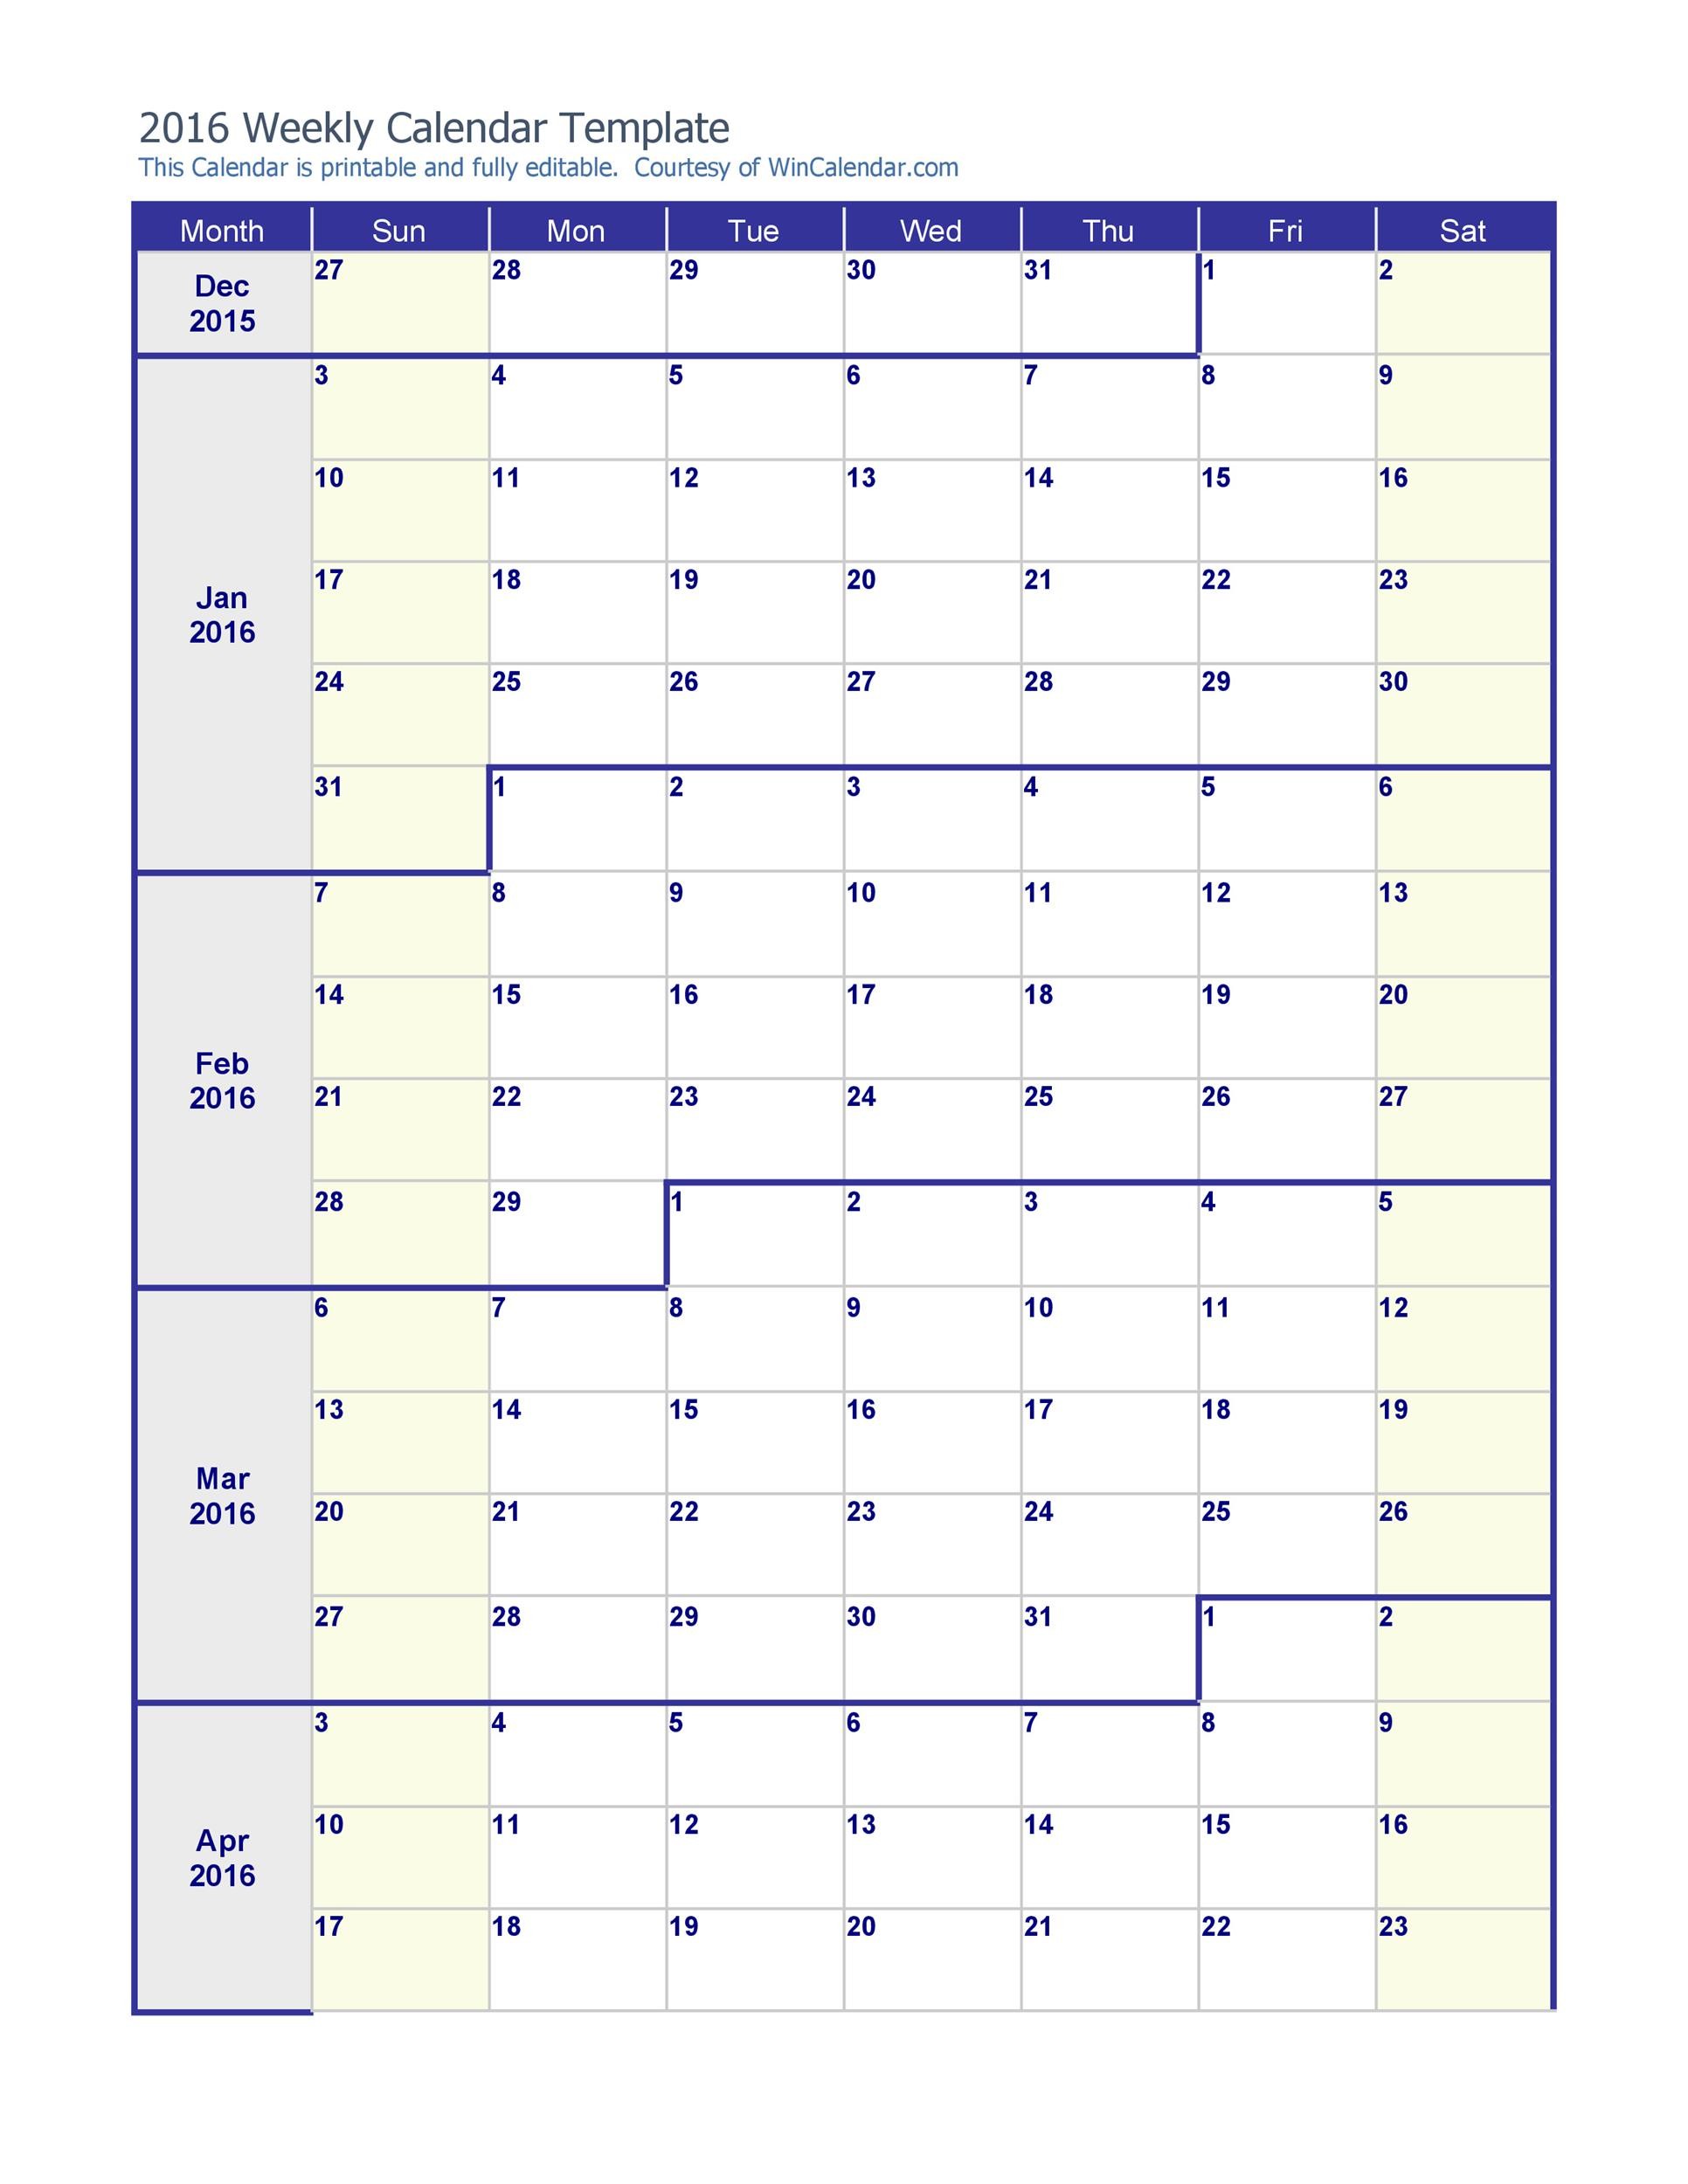 weekly-calendar-template-excel-customize-and-print